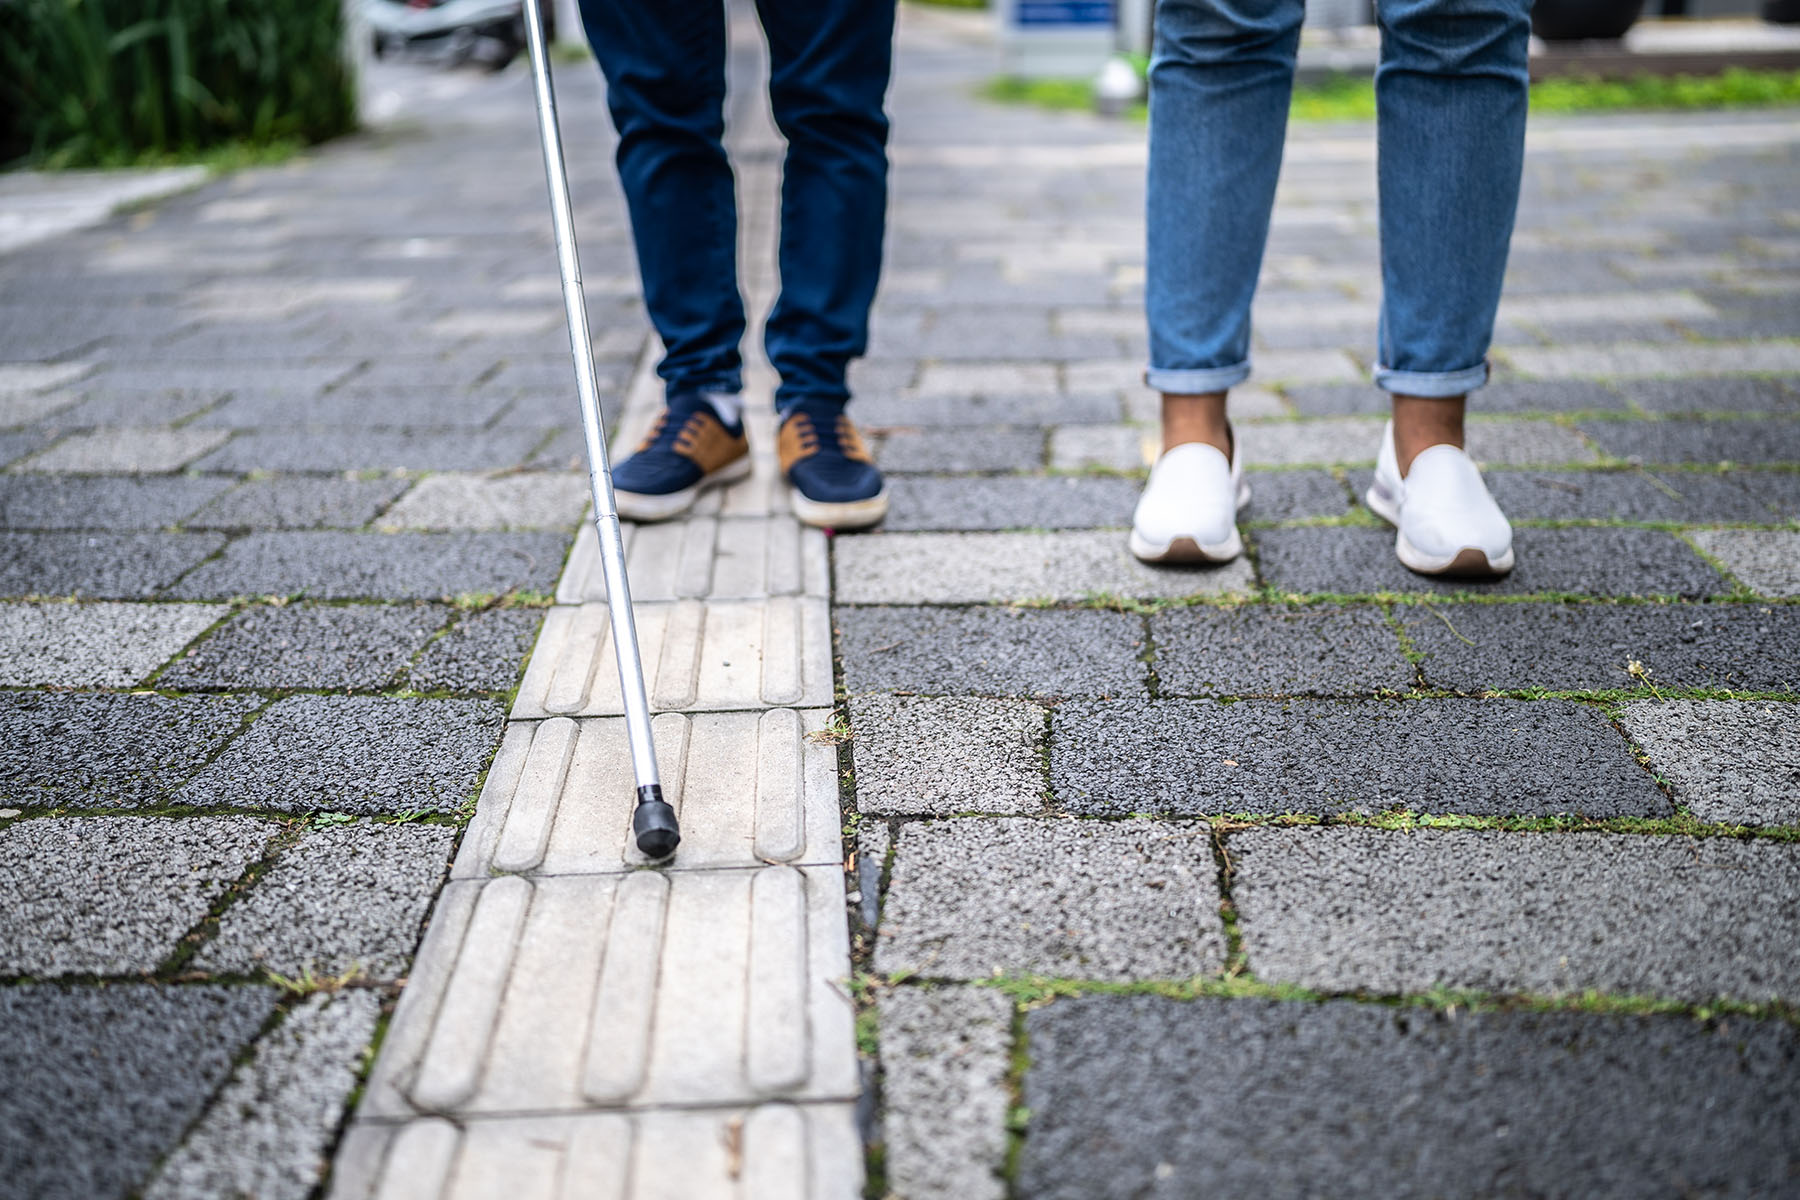 image of visually impaired people holding a cane walking down the street.